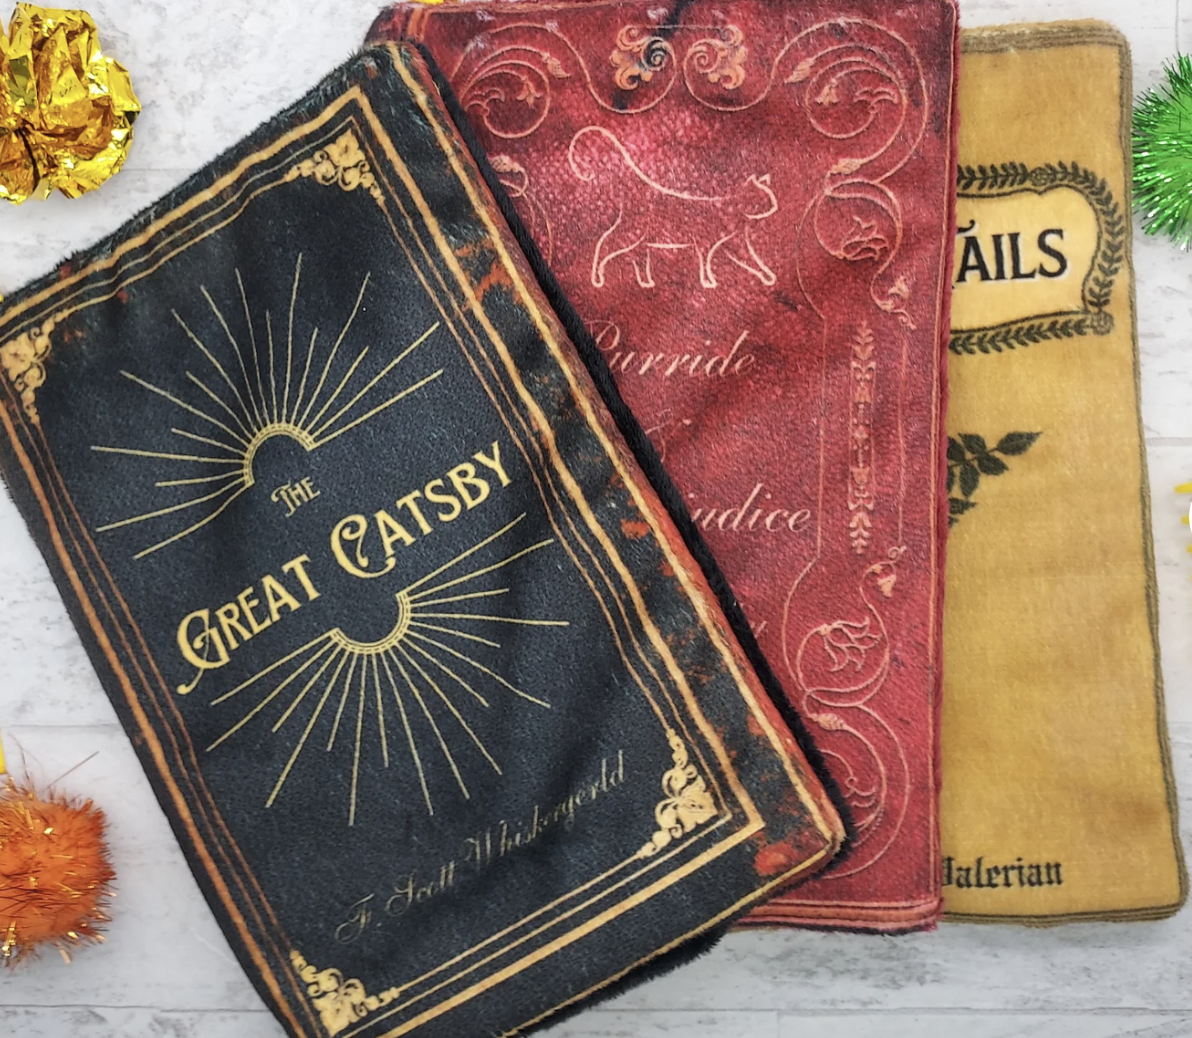 three fabric fake books that can be stuffed with catnip; the first says "The Great Catsby"